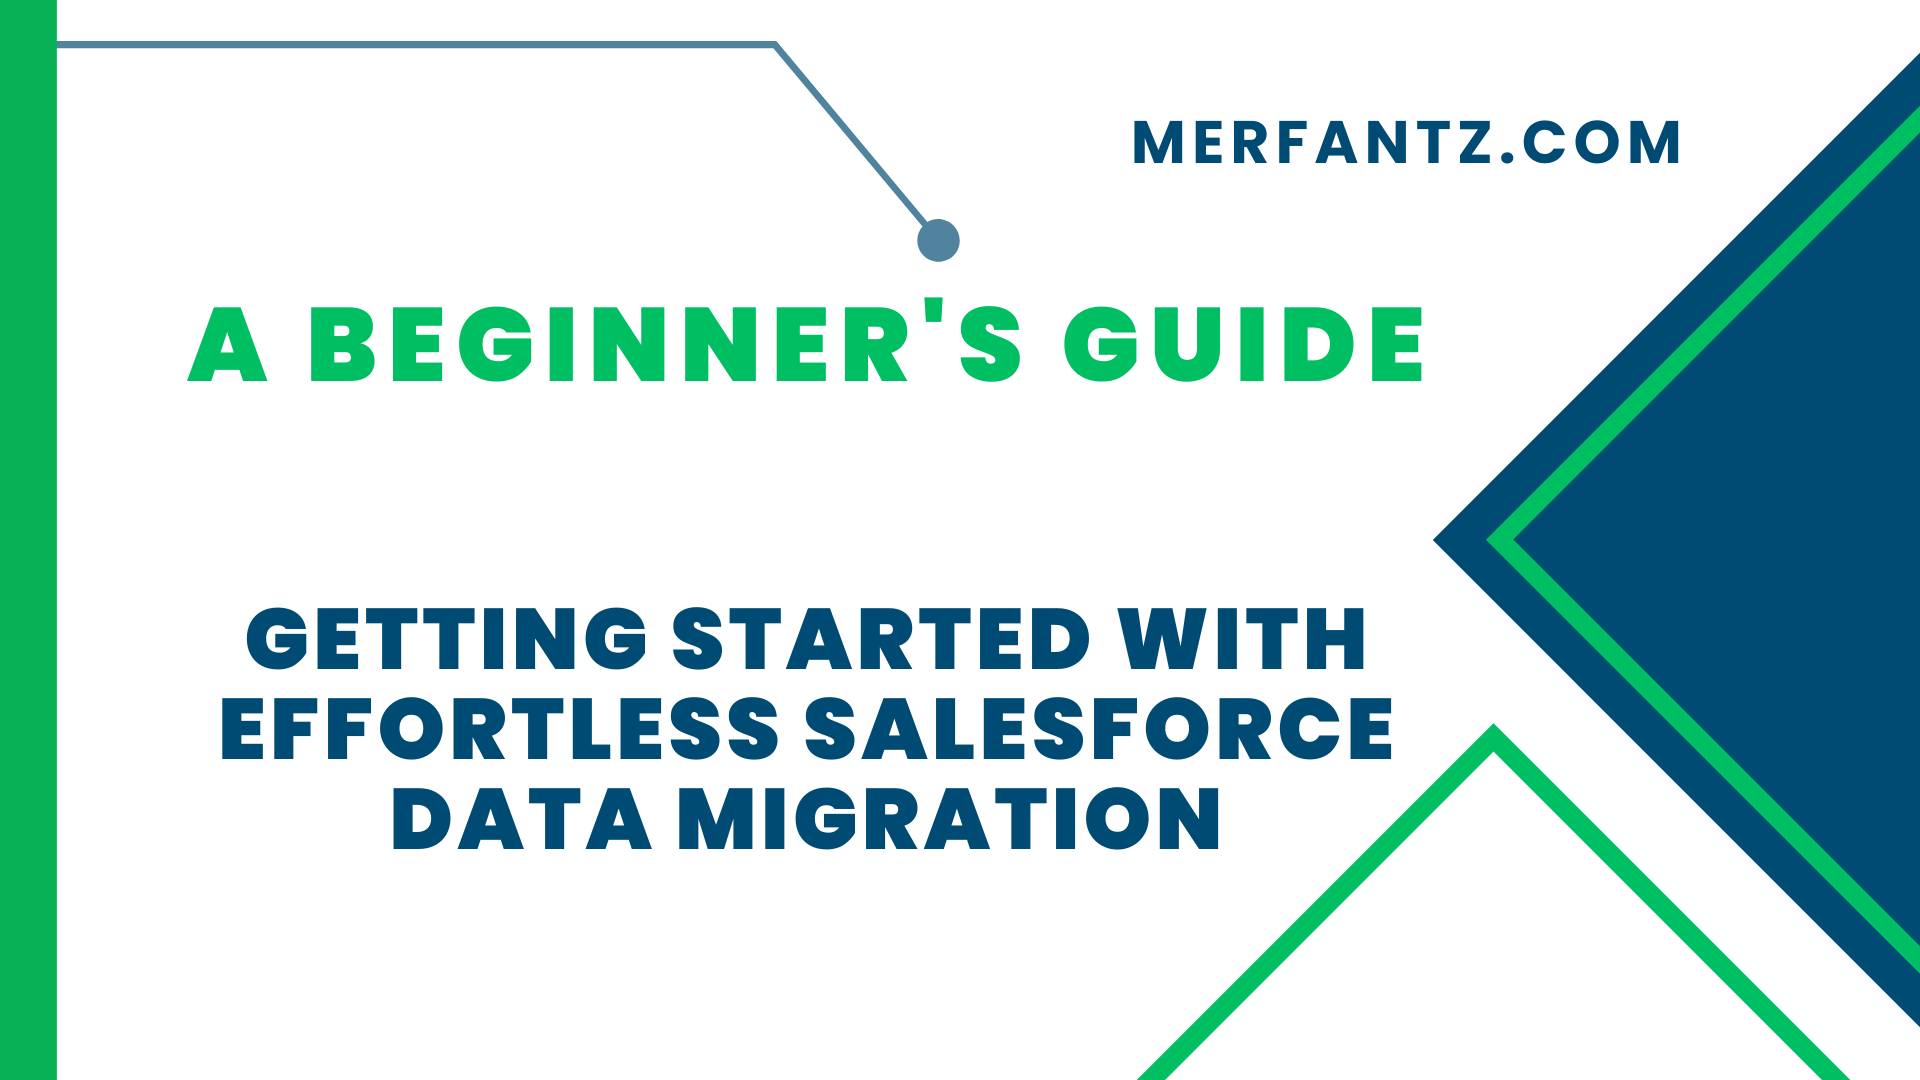 Getting Started with Effortless Salesforce Data Migration